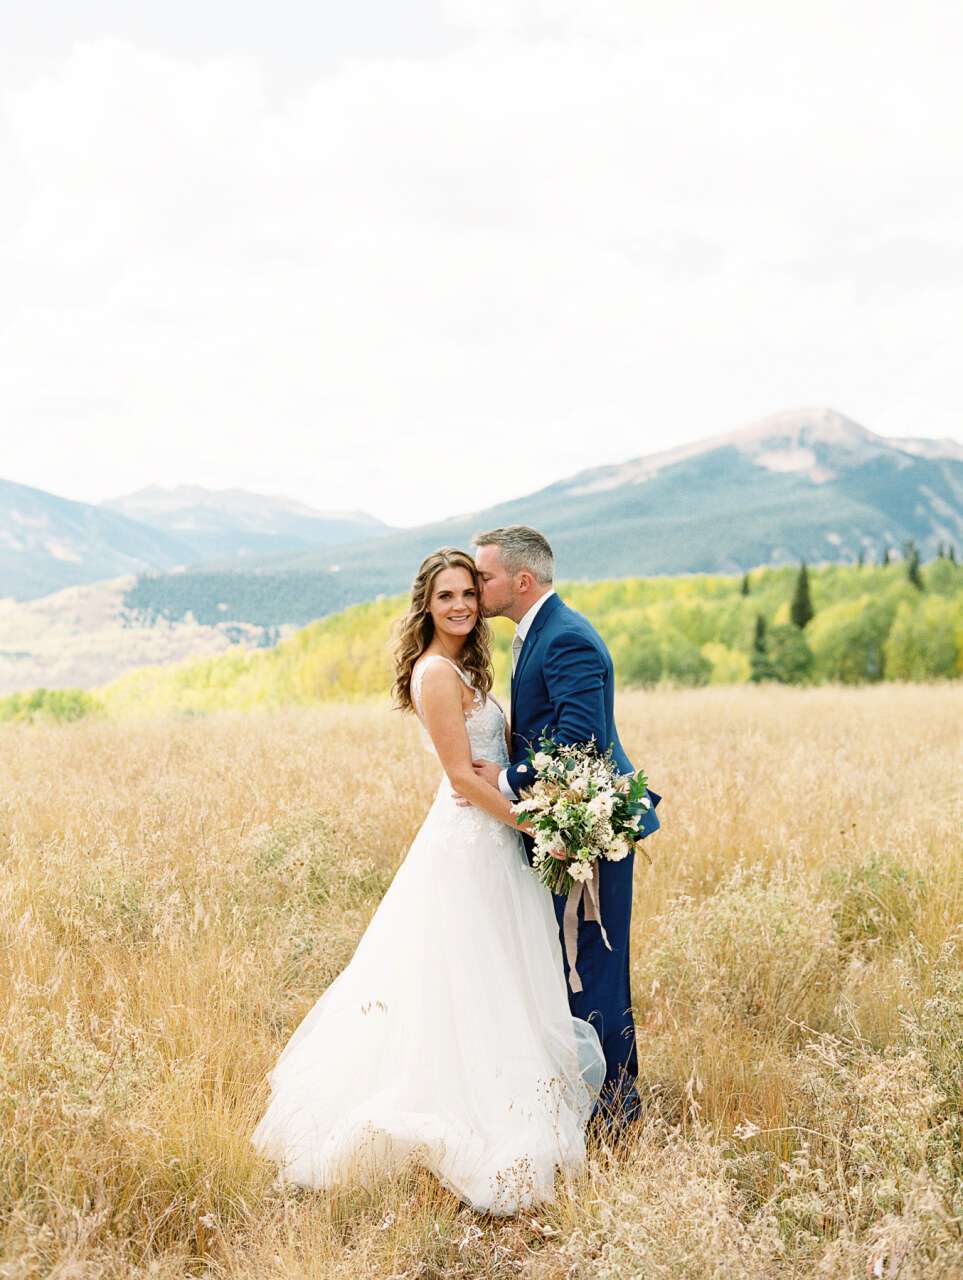 A Woodsy Mountaintop Wedding in Crested Butte, Colorado | Martha Stewart